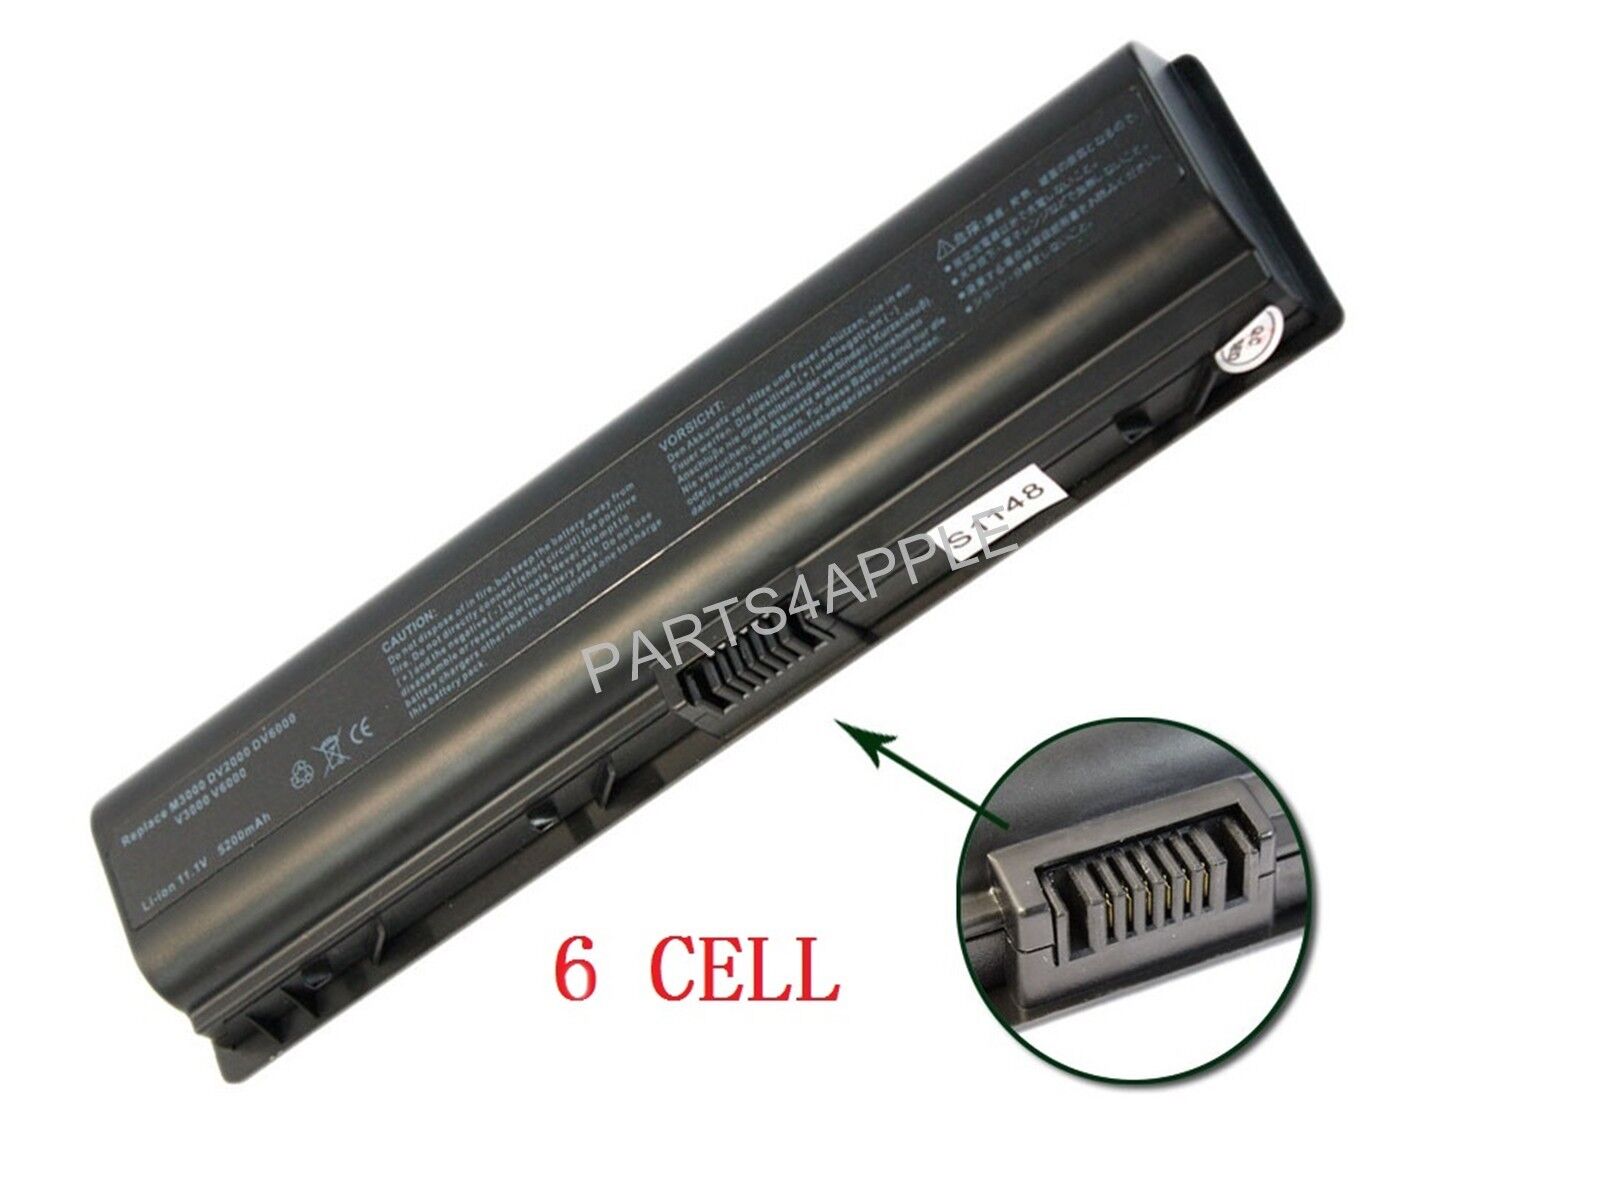 Generic Laptop Battery Replacement for HP G6000 G6010EG G6030EA 6 CELL